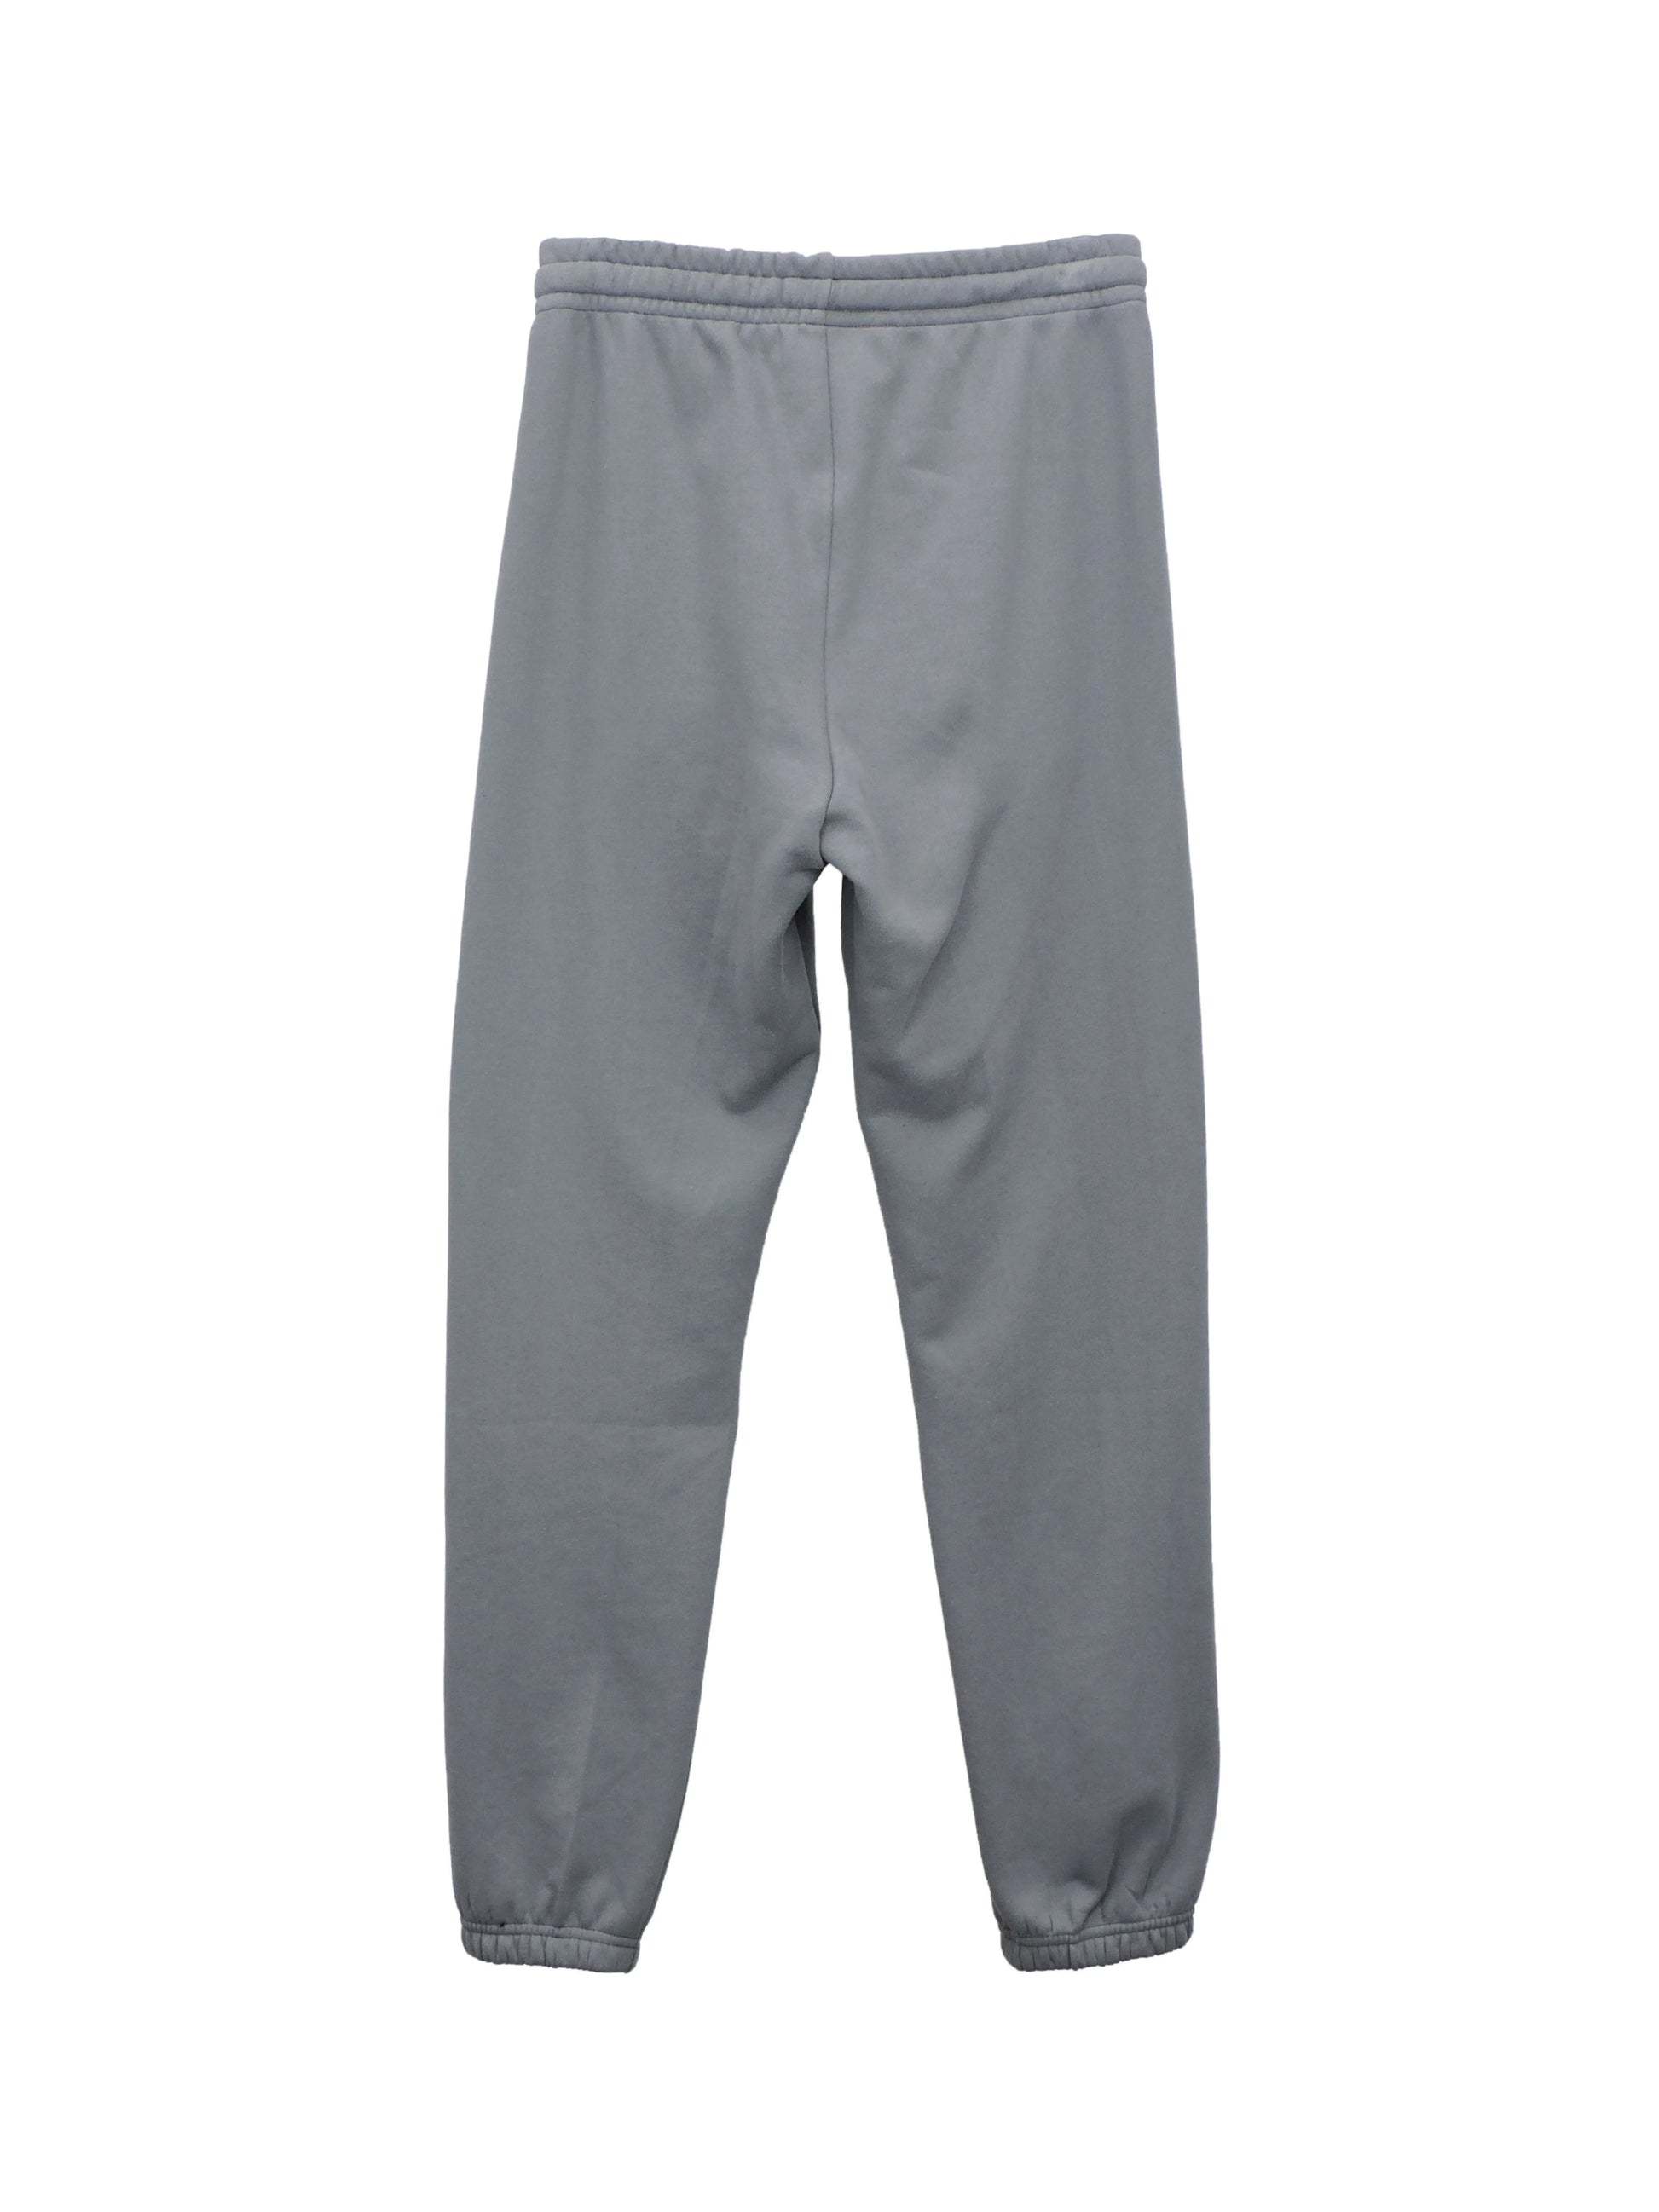 Back of Sweatpants with Elastic Ankle Cuffs